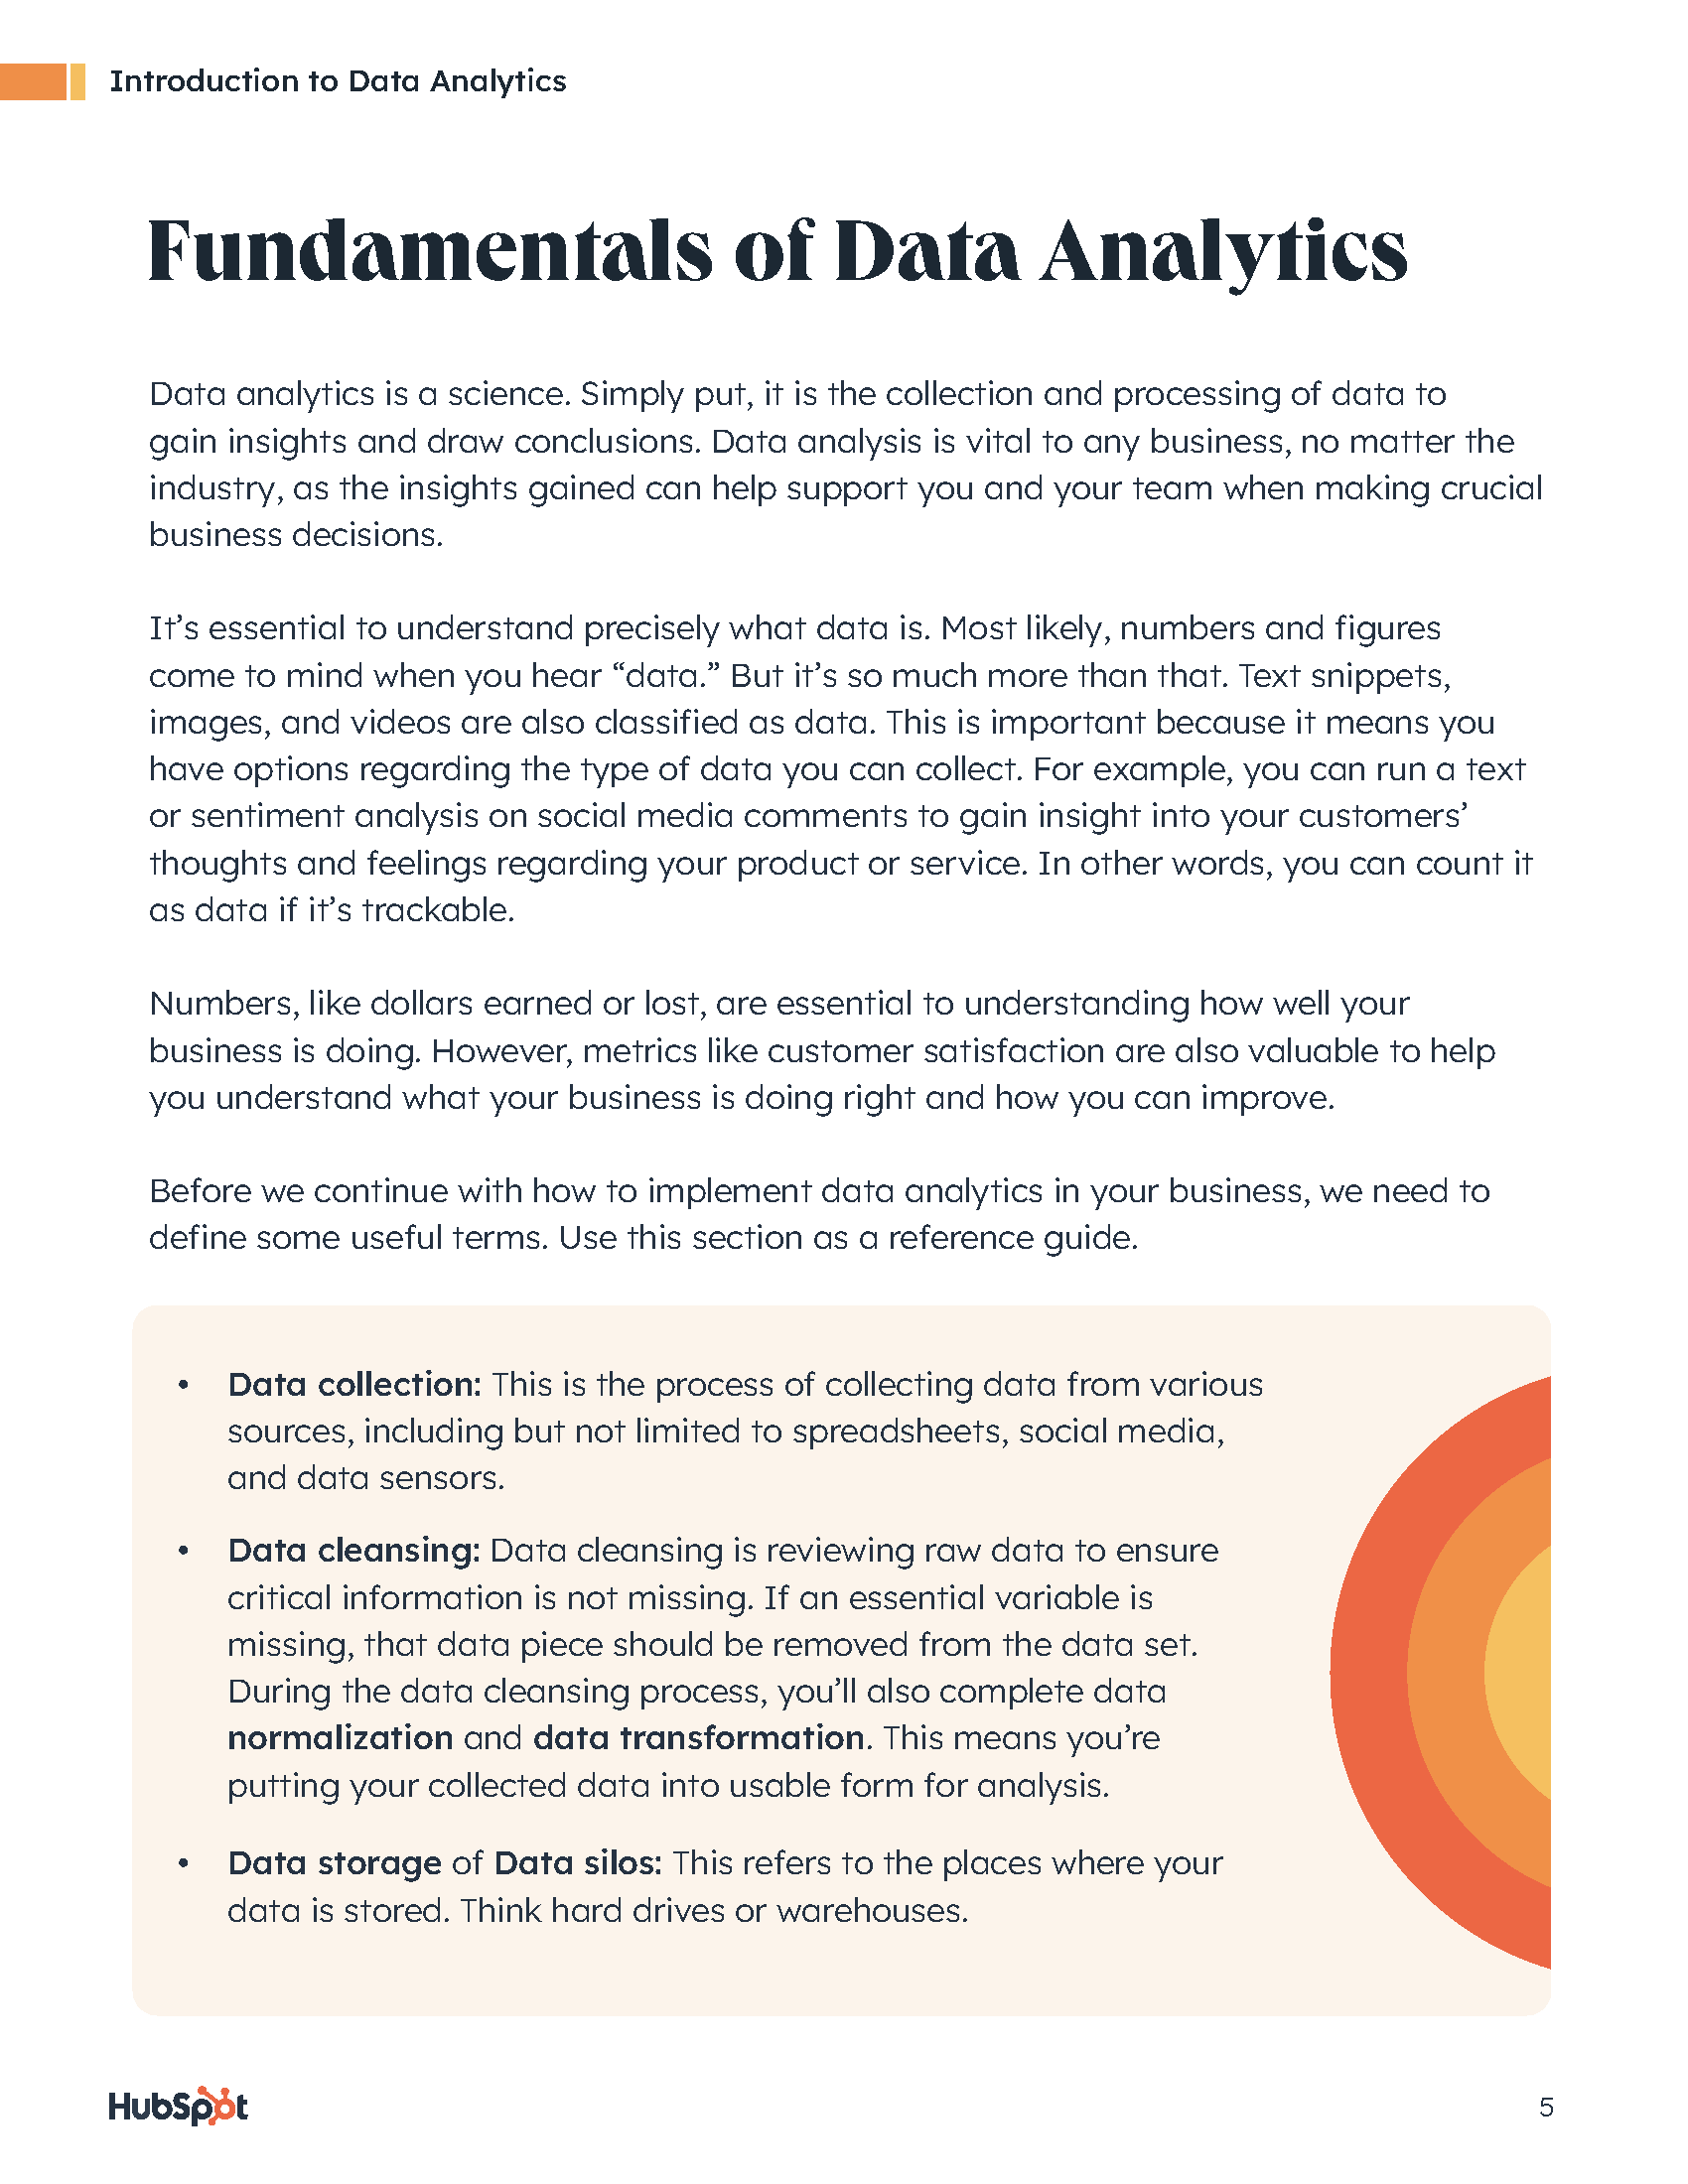 HubSpots Guide to Data Analytics_Page_05